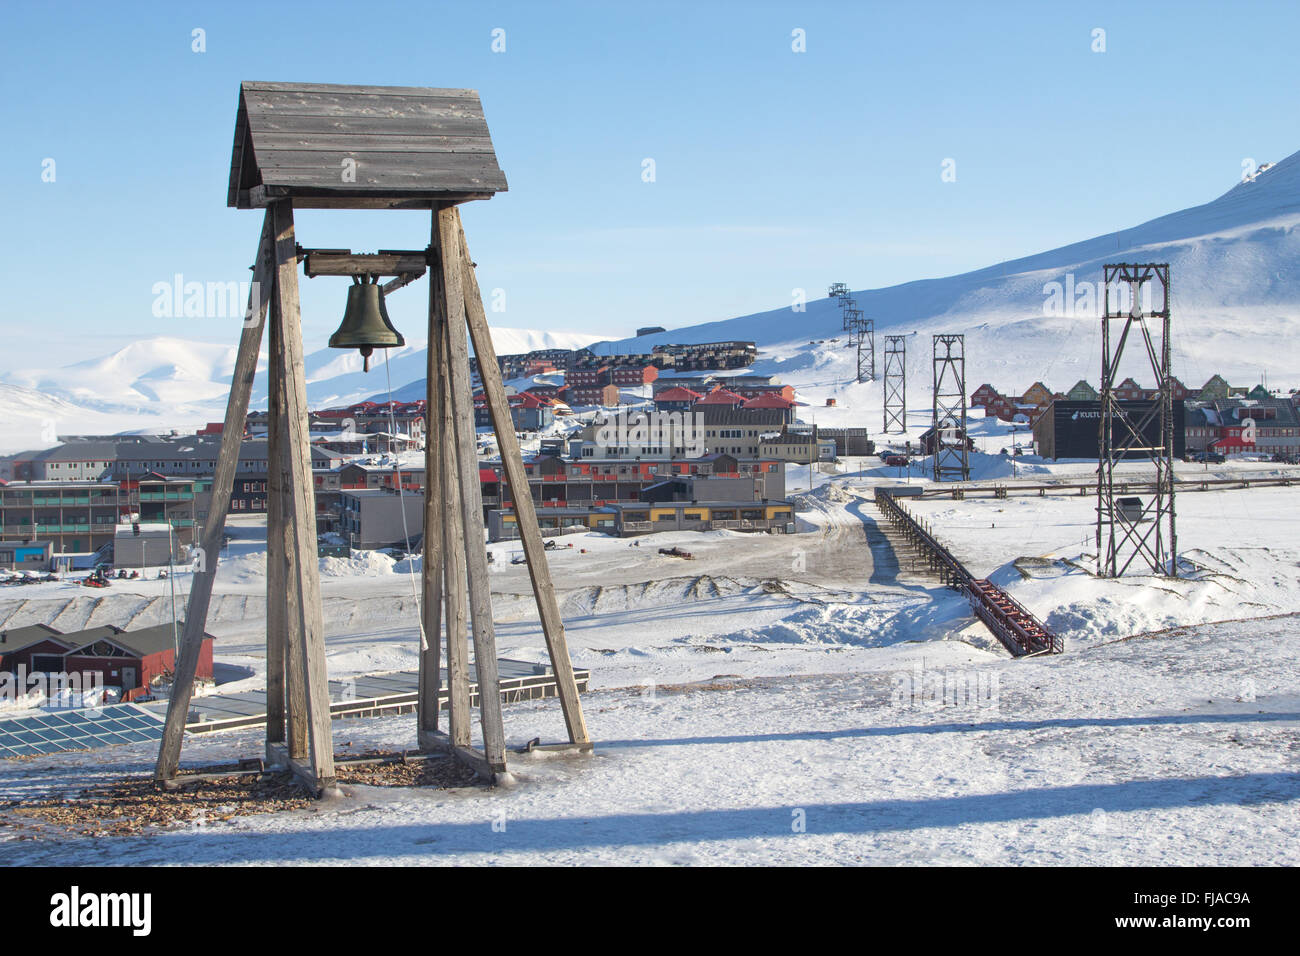 A town details of Longyearbyen - the most Northern settlement in the world. Svalbard, Norway. Stock Photo